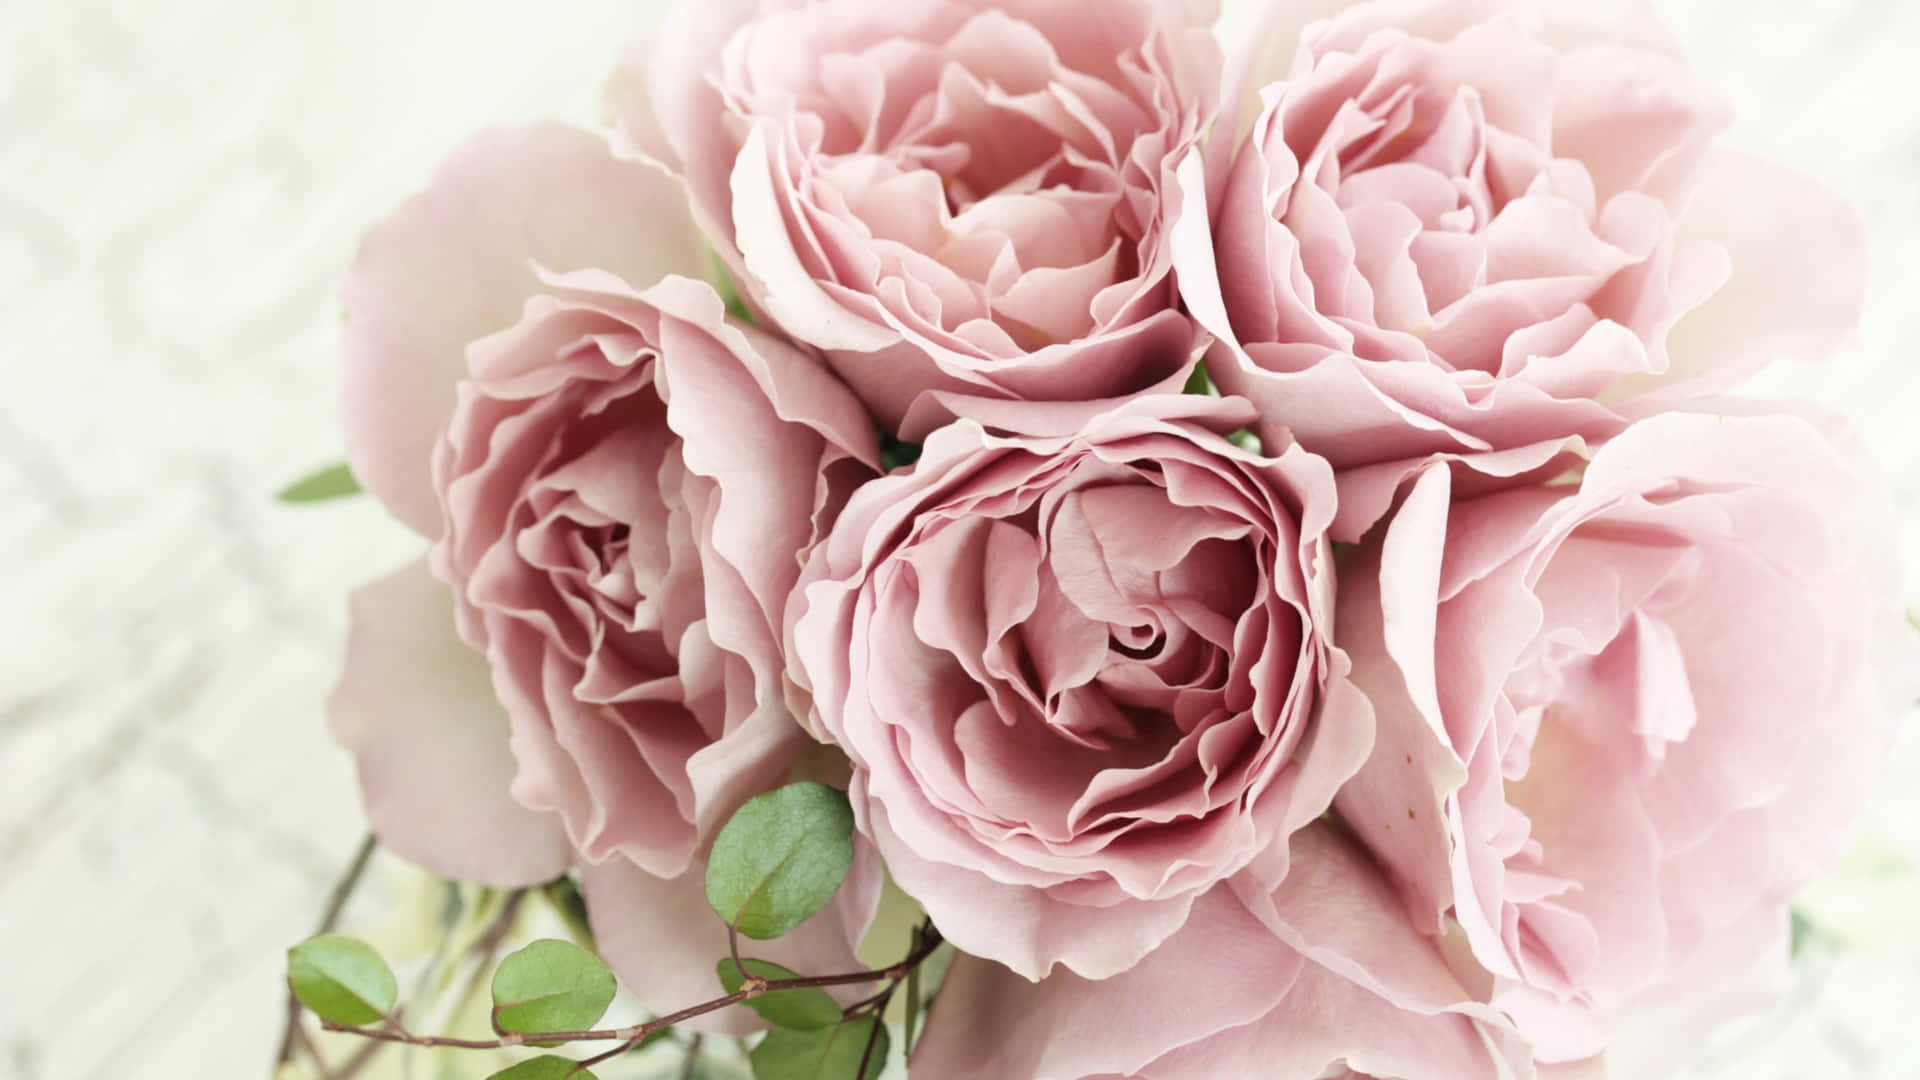 1440p Bouquet Of Pale Pink Roses Background